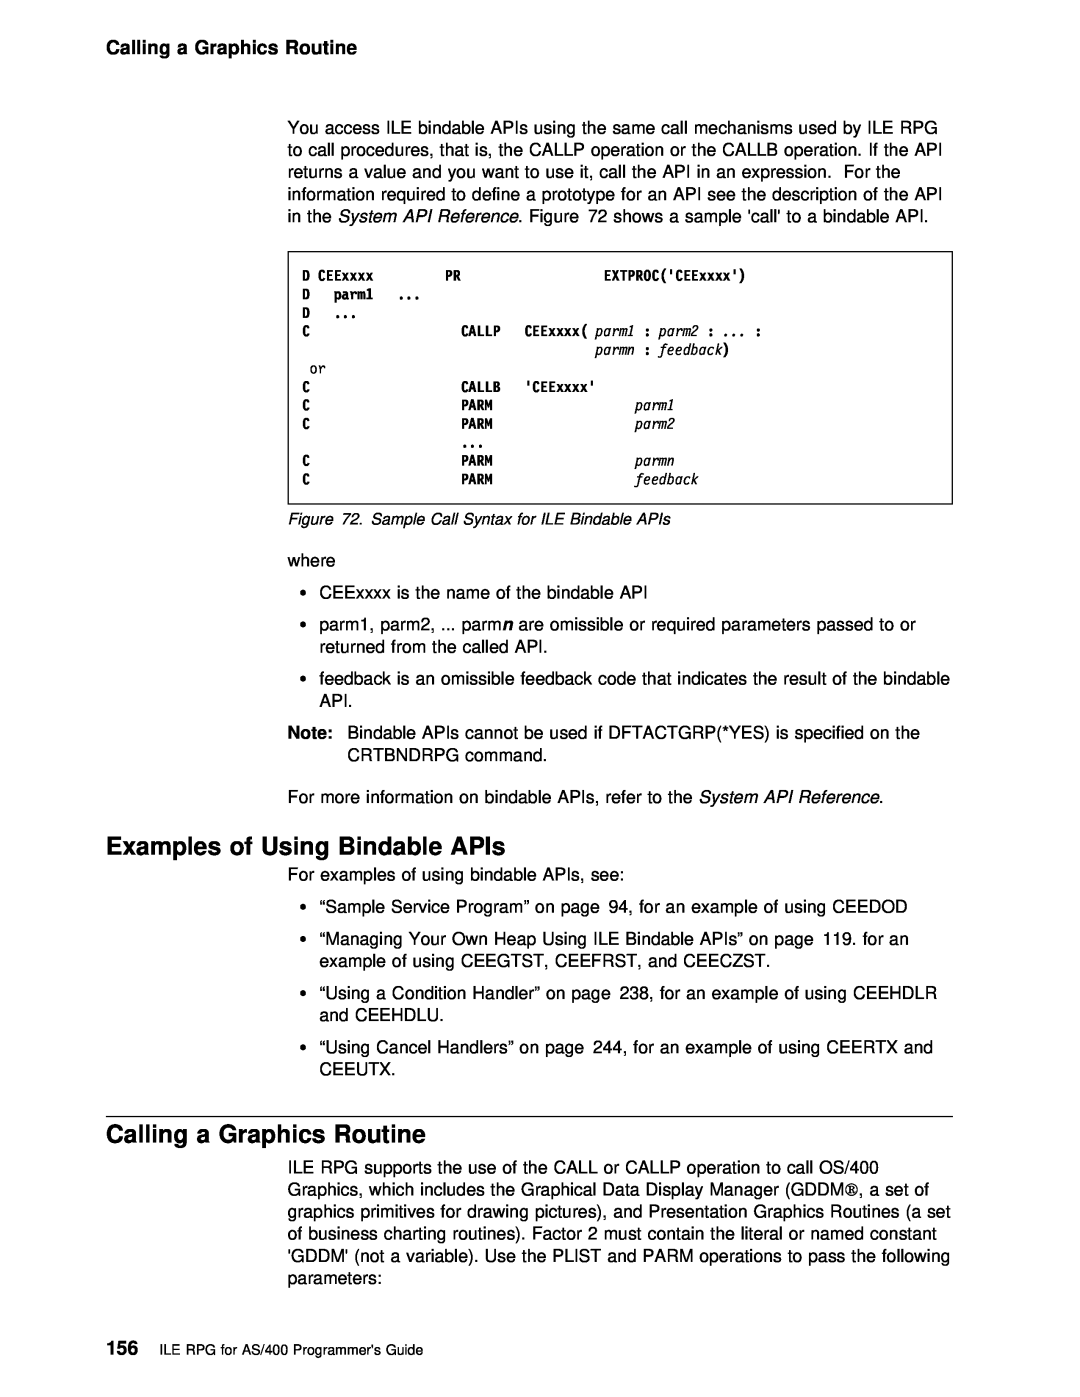 IBM AS/400 manual Examples of Using Bindable APIs, Calling a Graphics Routine 